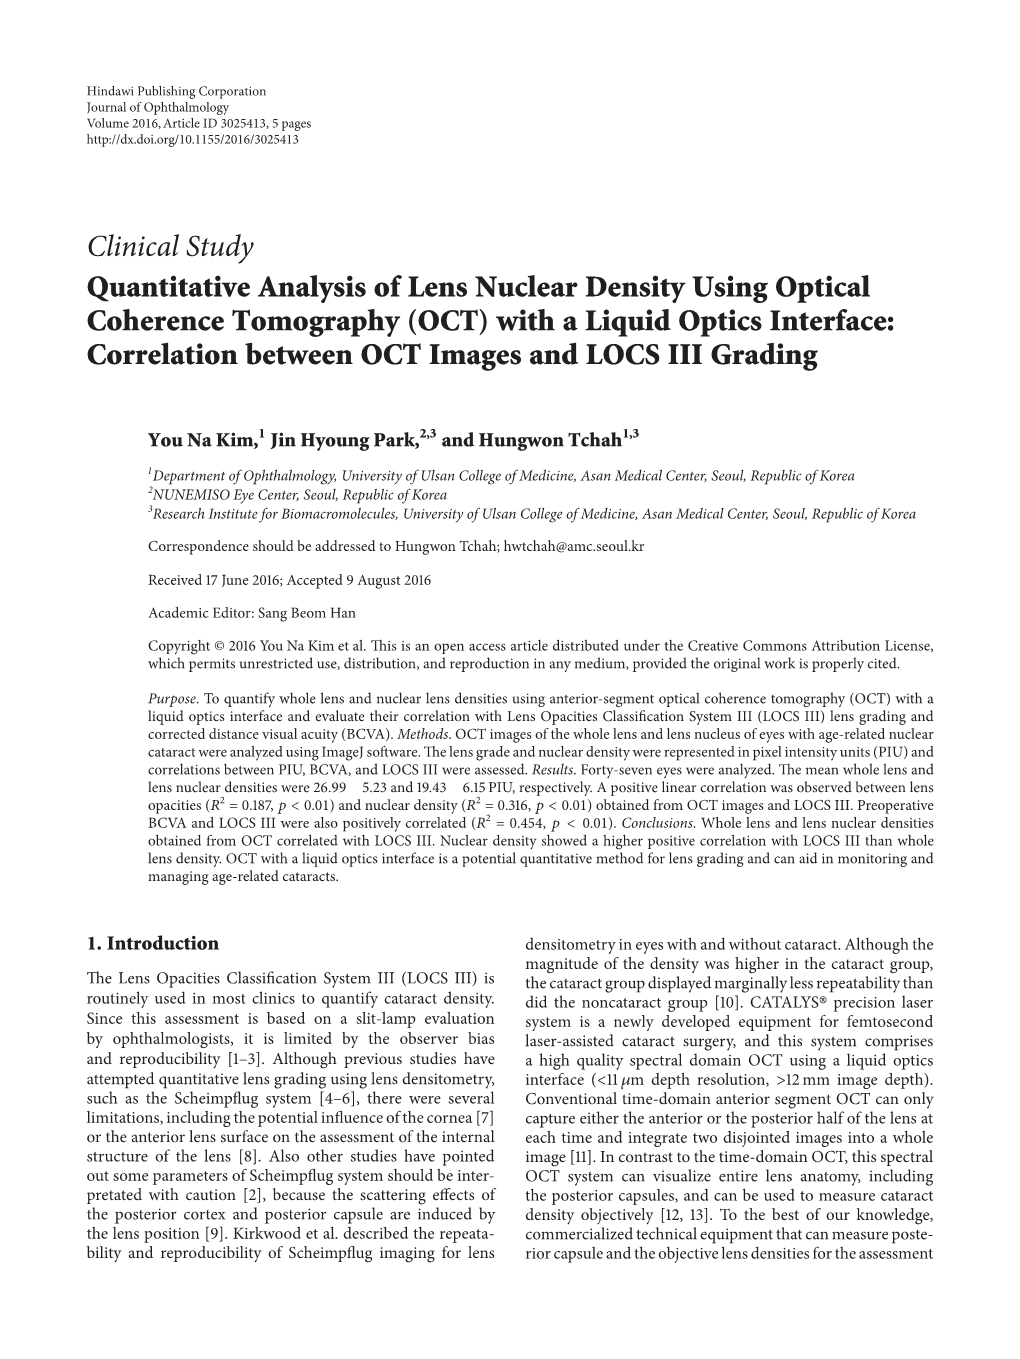 Clinical Study Quantitative Analysis of Lens Nuclear Density Using Optical Coherence Tomography